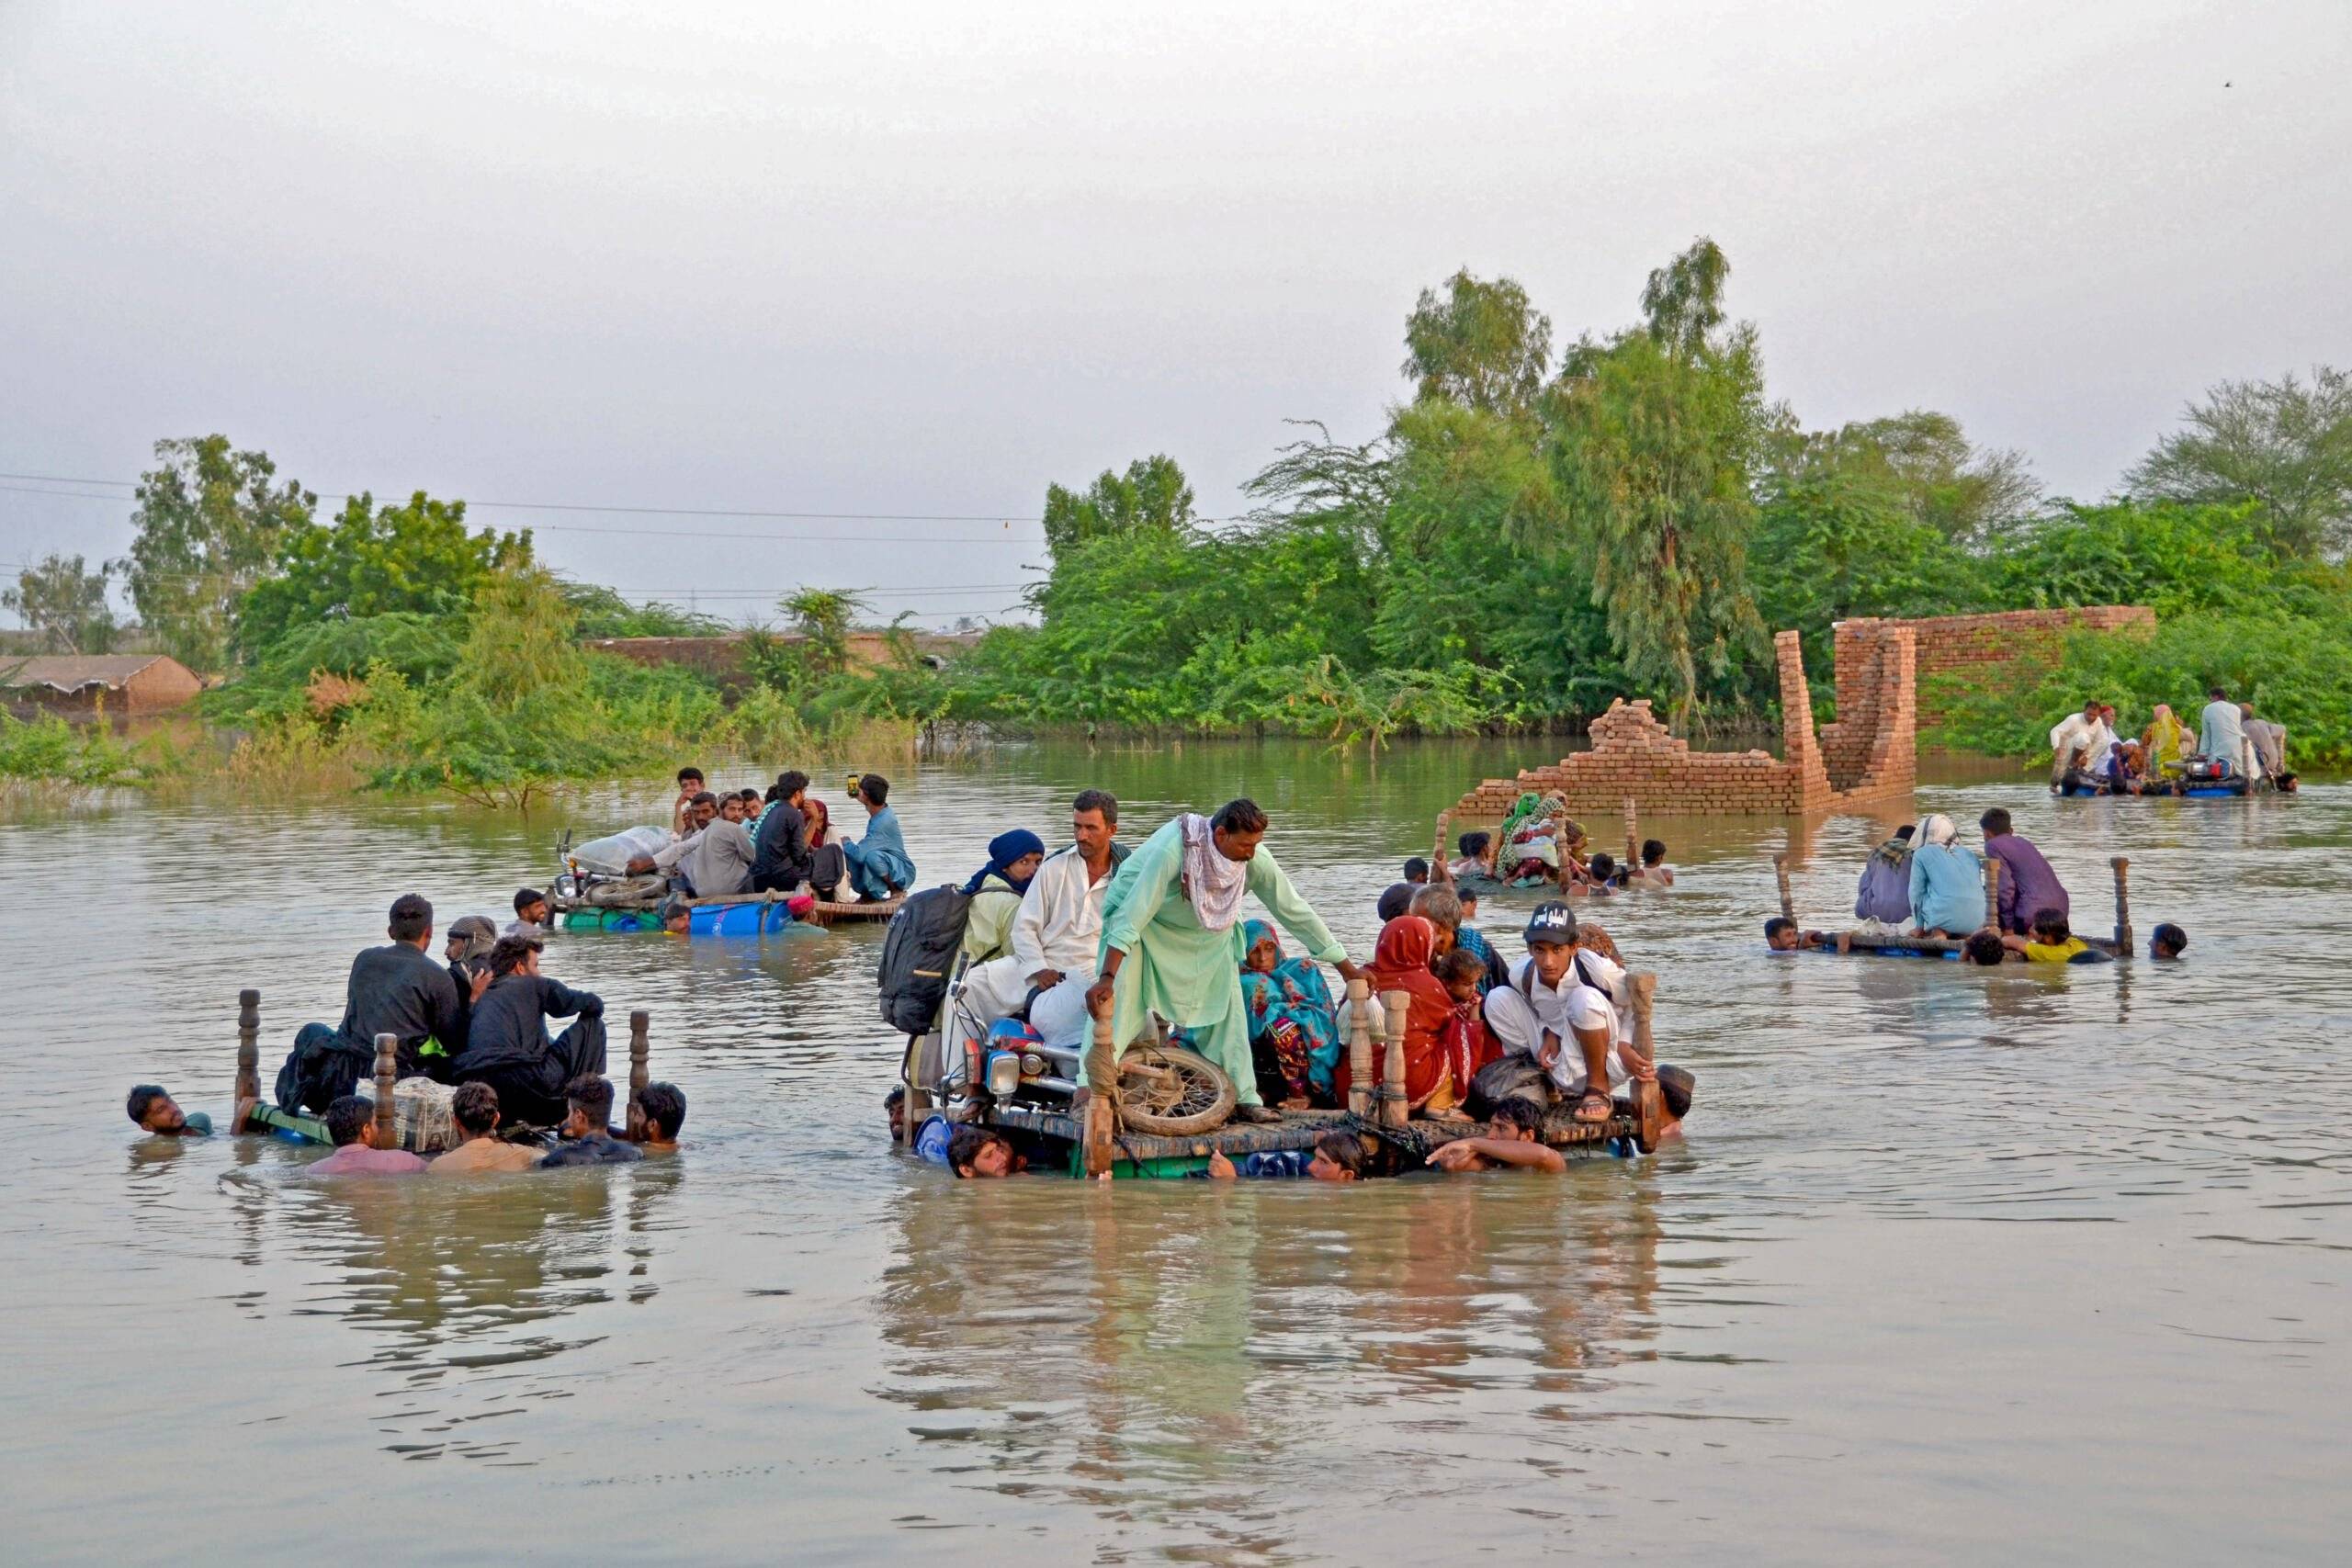 Internally displaced people wade through floodwaters after heavy monsoon rains in Jaffarabad district in Balochistan province on September 8, 2022. - Record monsoon rains have caused devastating floods across Pakistan since June, killing more than 1,200 people and leaving almost a third of the country under water, affecting the lives of 33 million. (Photo by Fida HUSSAIN / AFP)